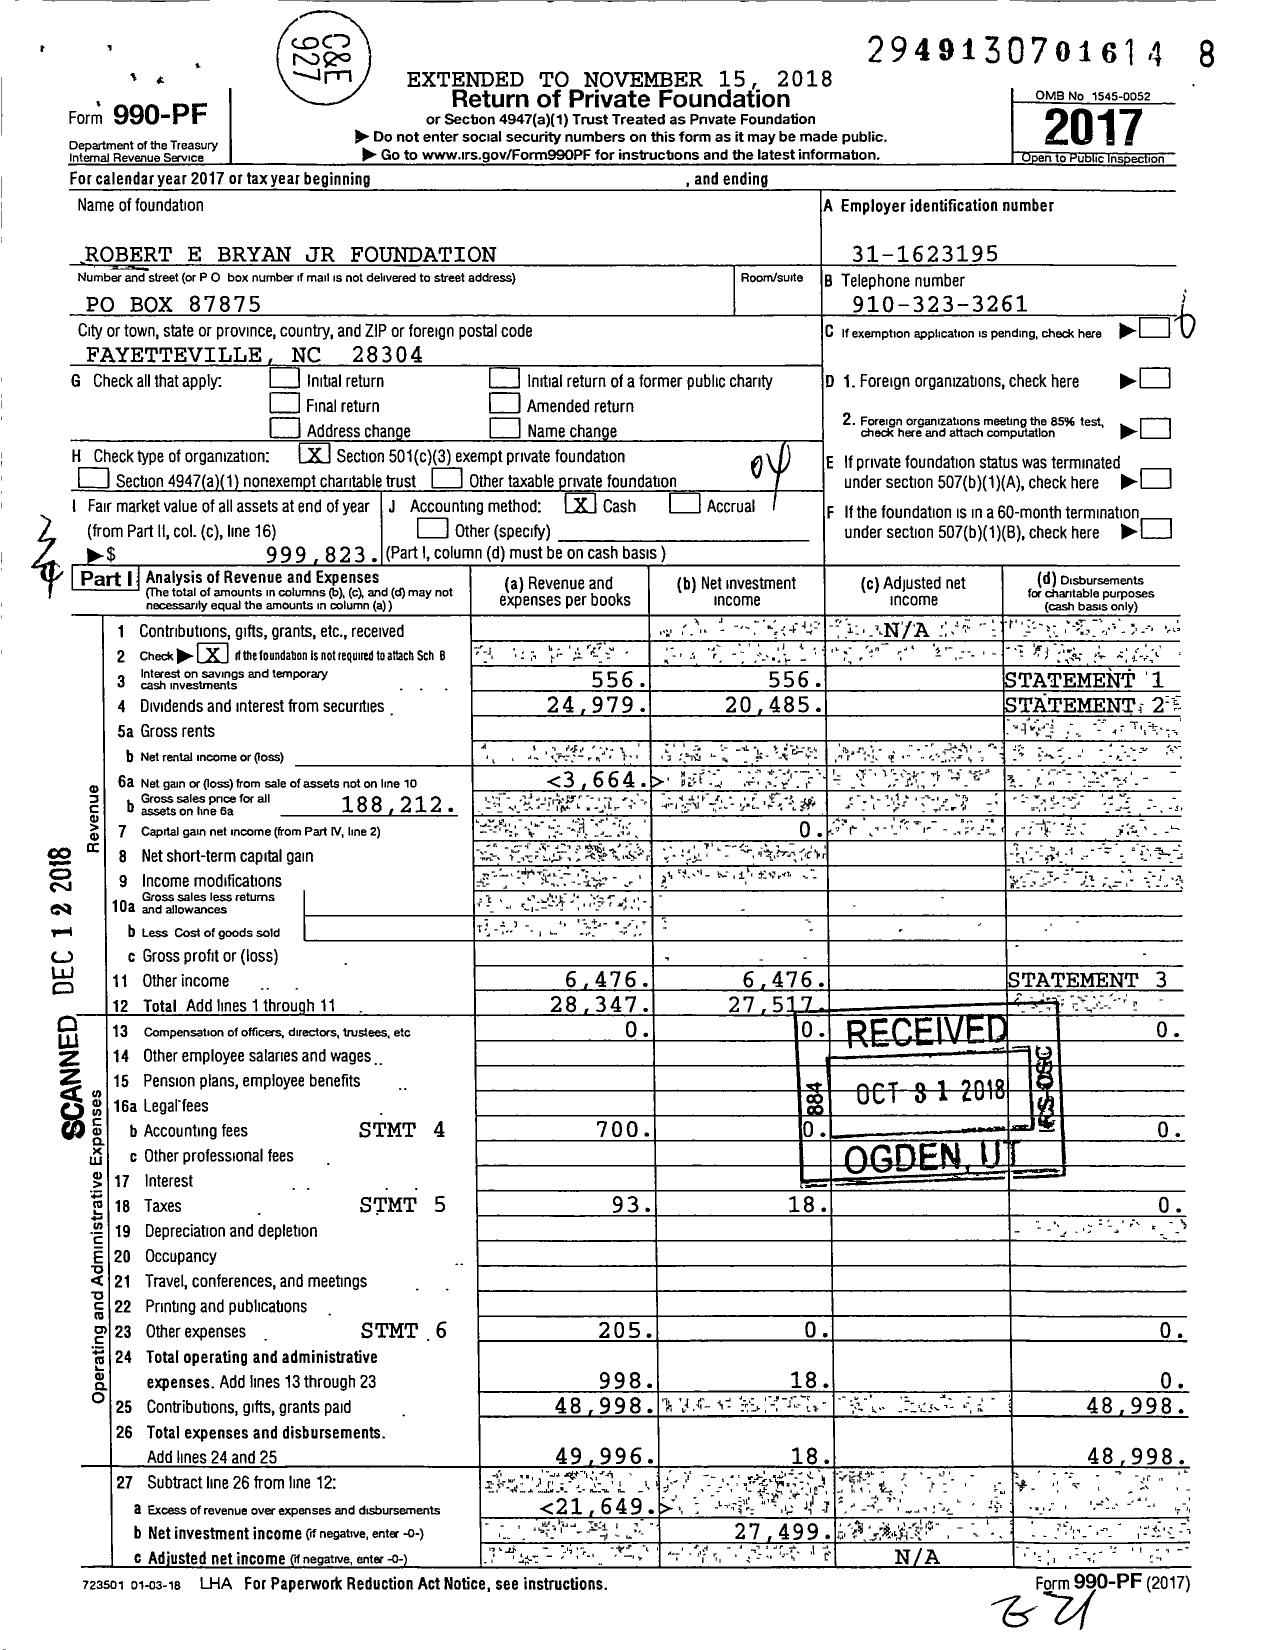 Image of first page of 2017 Form 990PF for Robert E Bryan JR Foundation